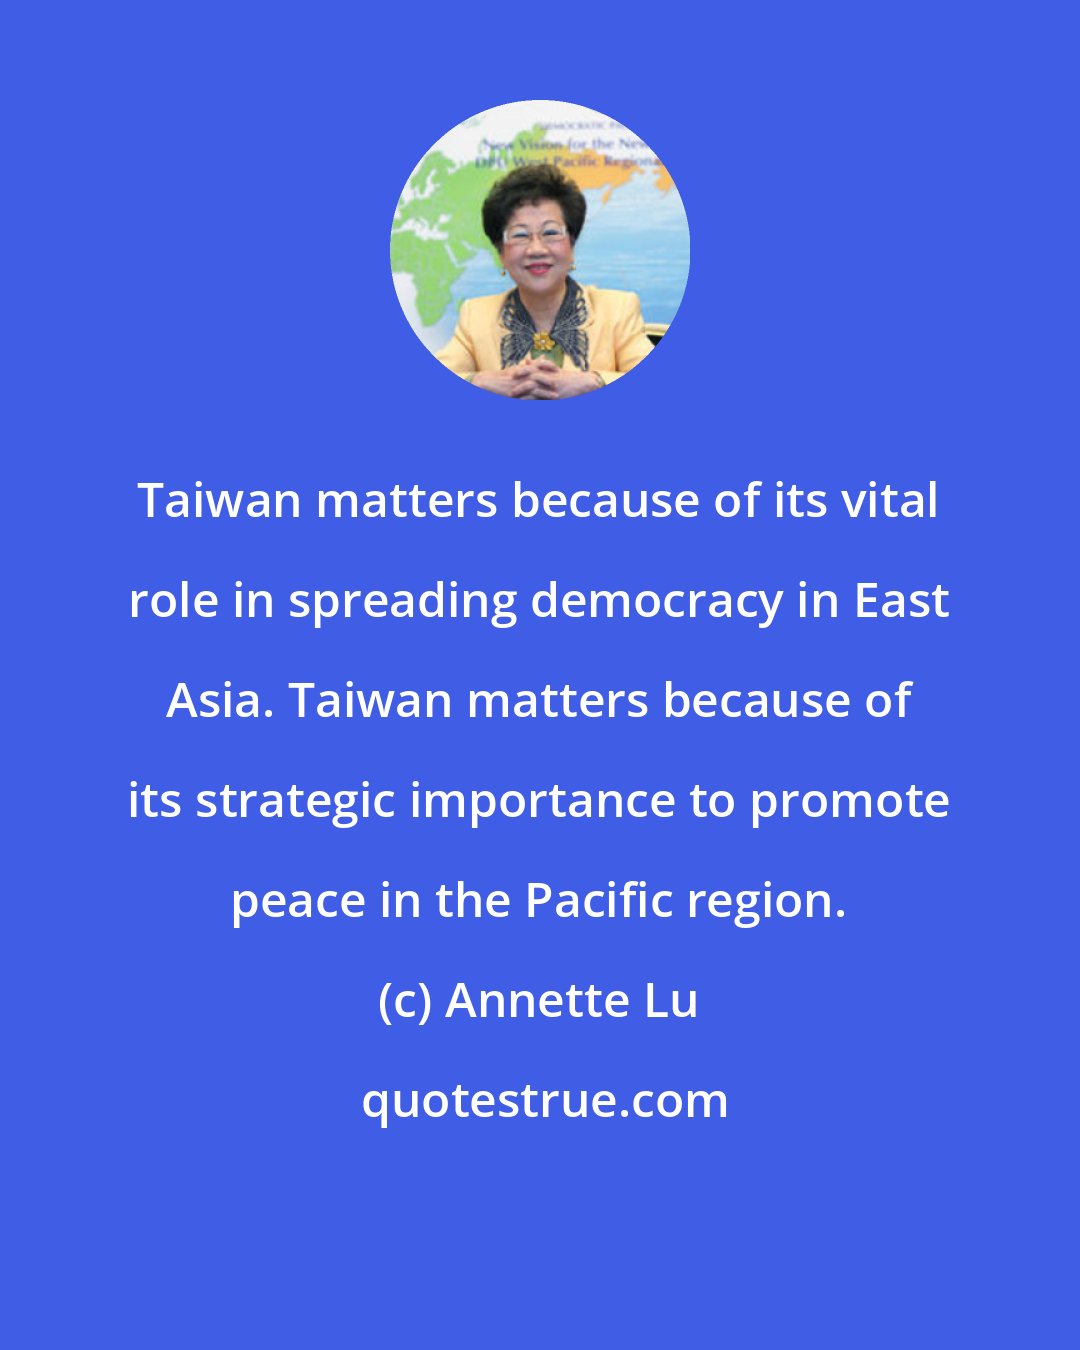 Annette Lu: Taiwan matters because of its vital role in spreading democracy in East Asia. Taiwan matters because of its strategic importance to promote peace in the Pacific region.